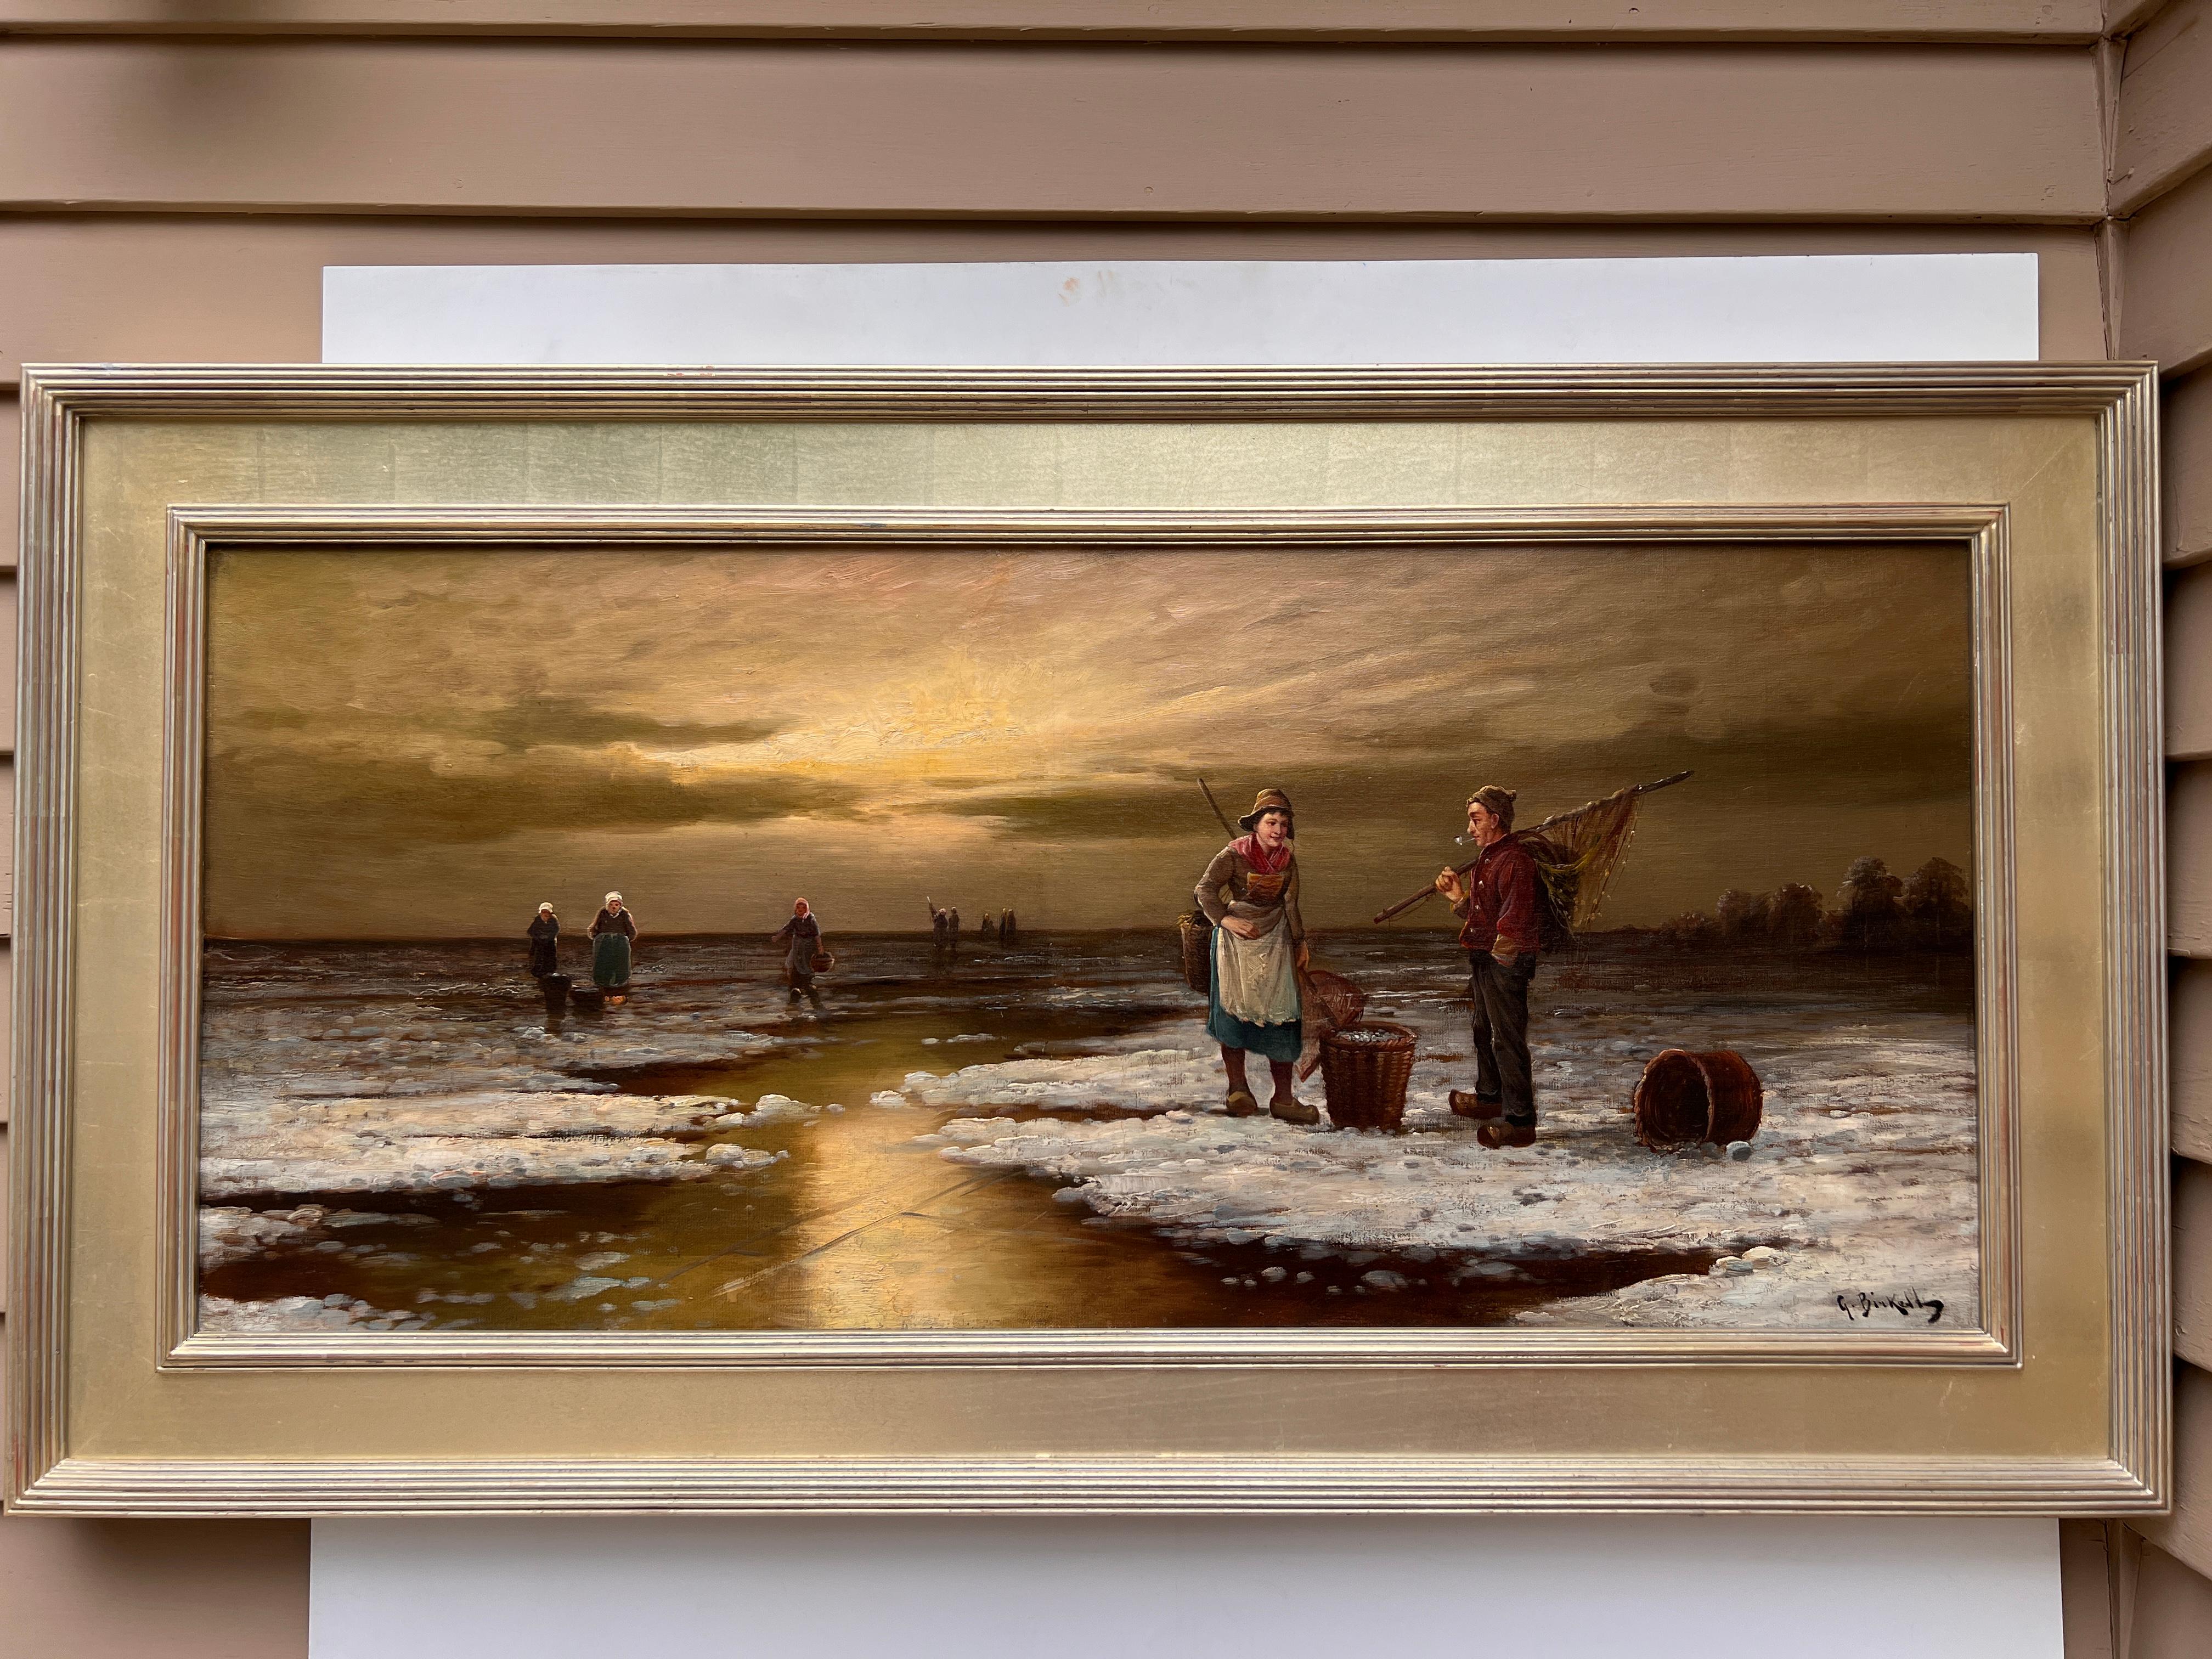 Up for sale is an original Large antique oil painting on canvas depicting a genre scene - winter canal scene - figures on the shore.

Signed in the lower-right corner by artist G. Birkett.

Condition: Painting relined, restored, cleaned. With a